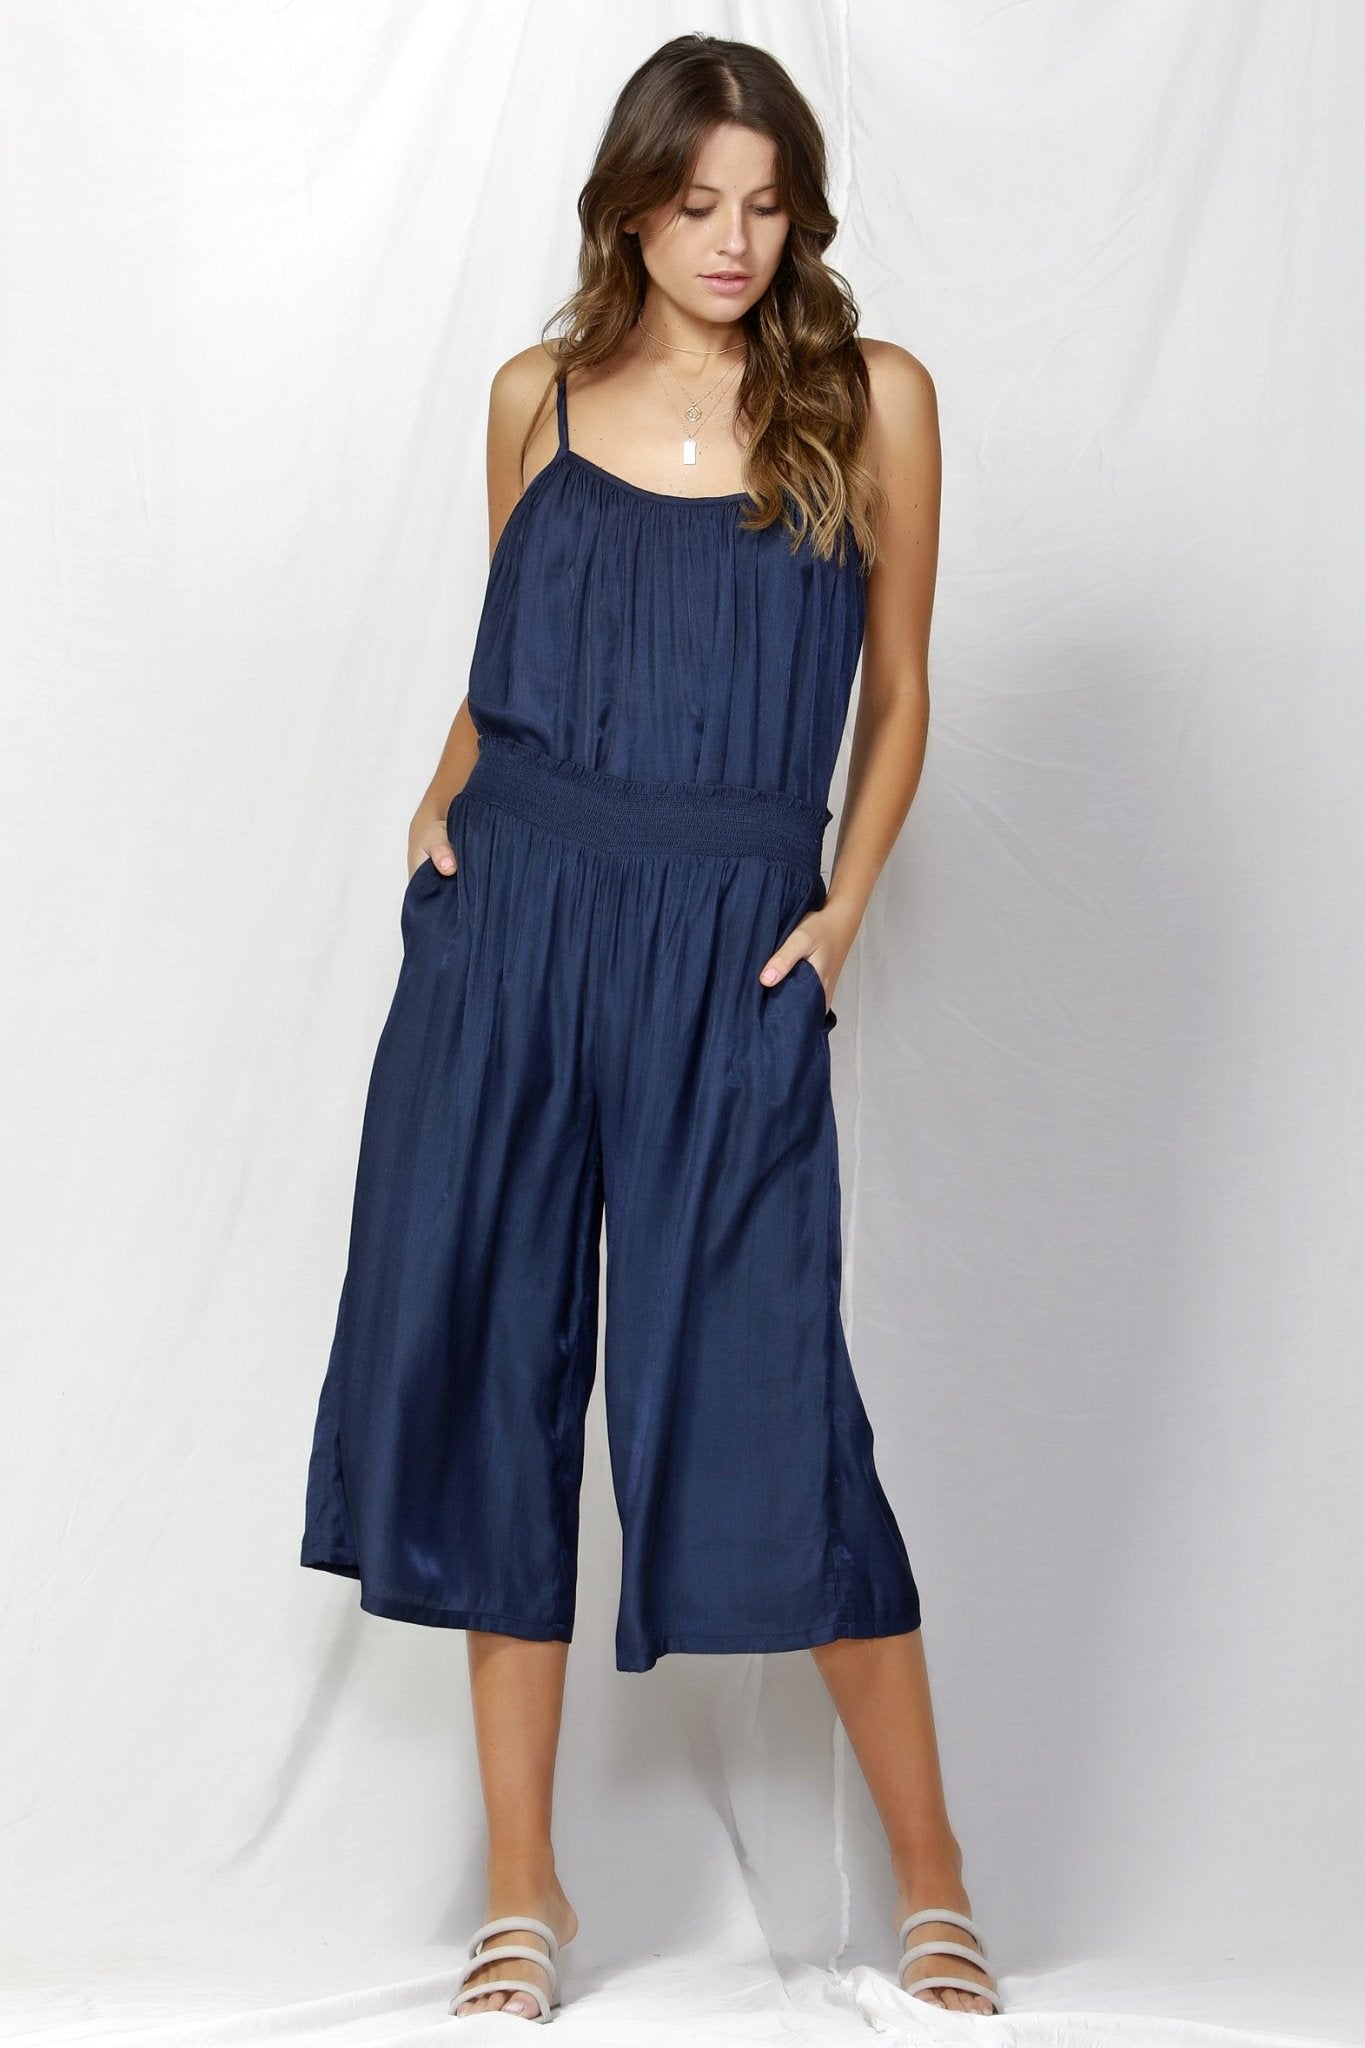 Fate + Becker So Me Shirred Waist Culottes in Navy SIZE XS OR L ONLY - Hey Sara